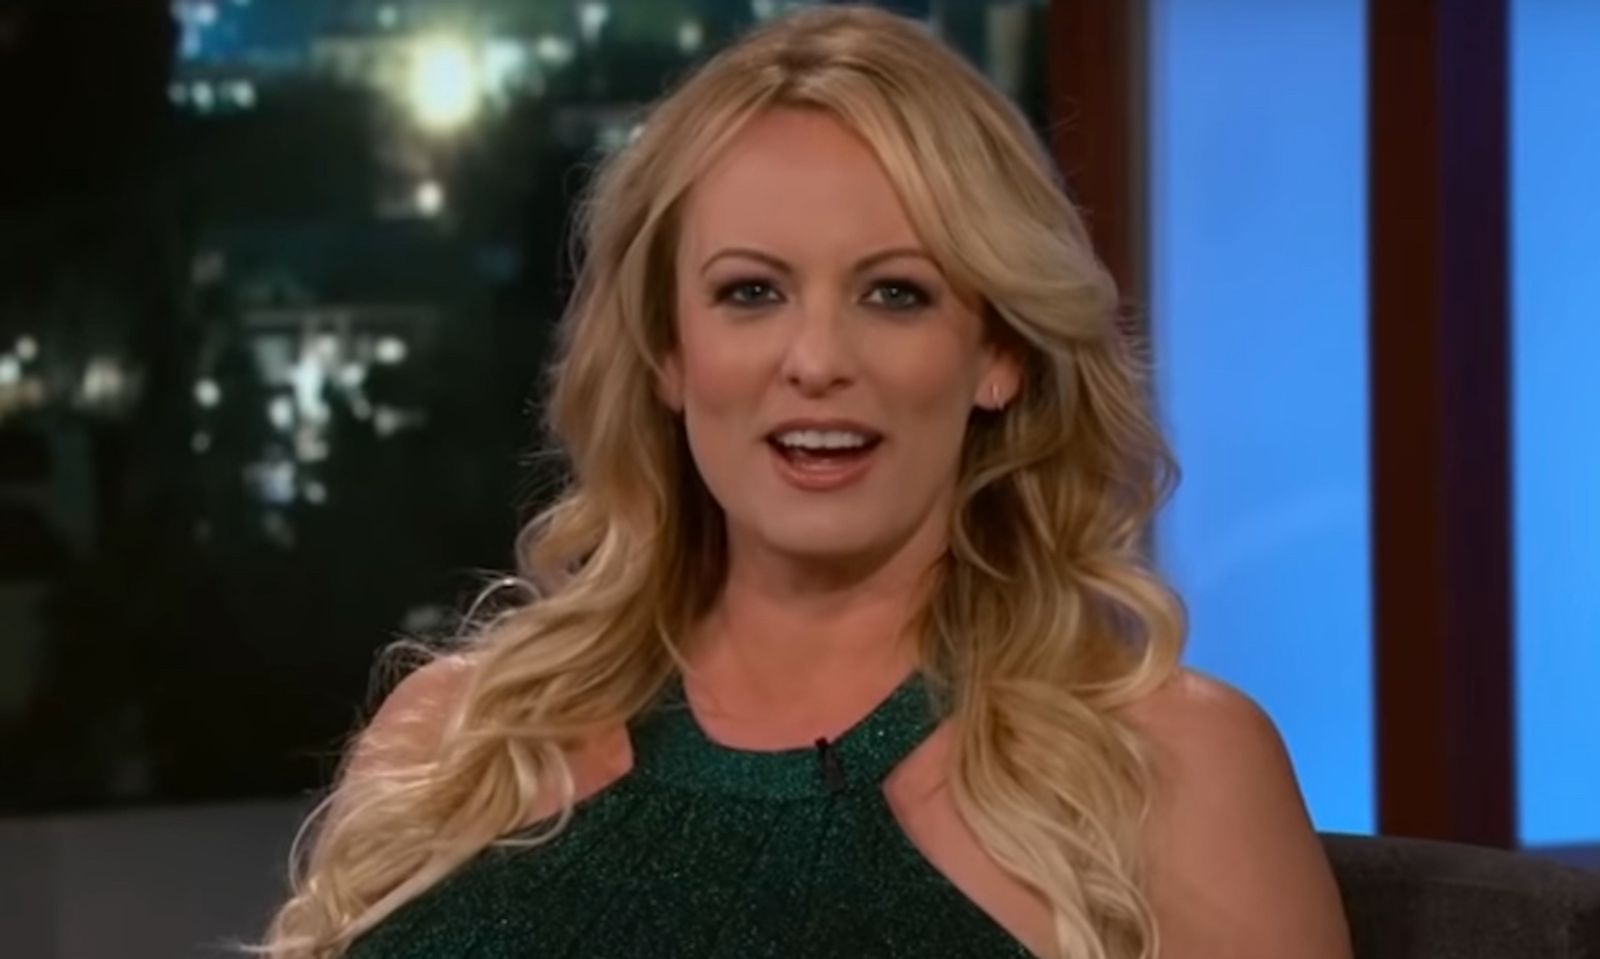 Stormy Daniels Drags Michael Cohen On Twitter Over Trump ‘Threat’